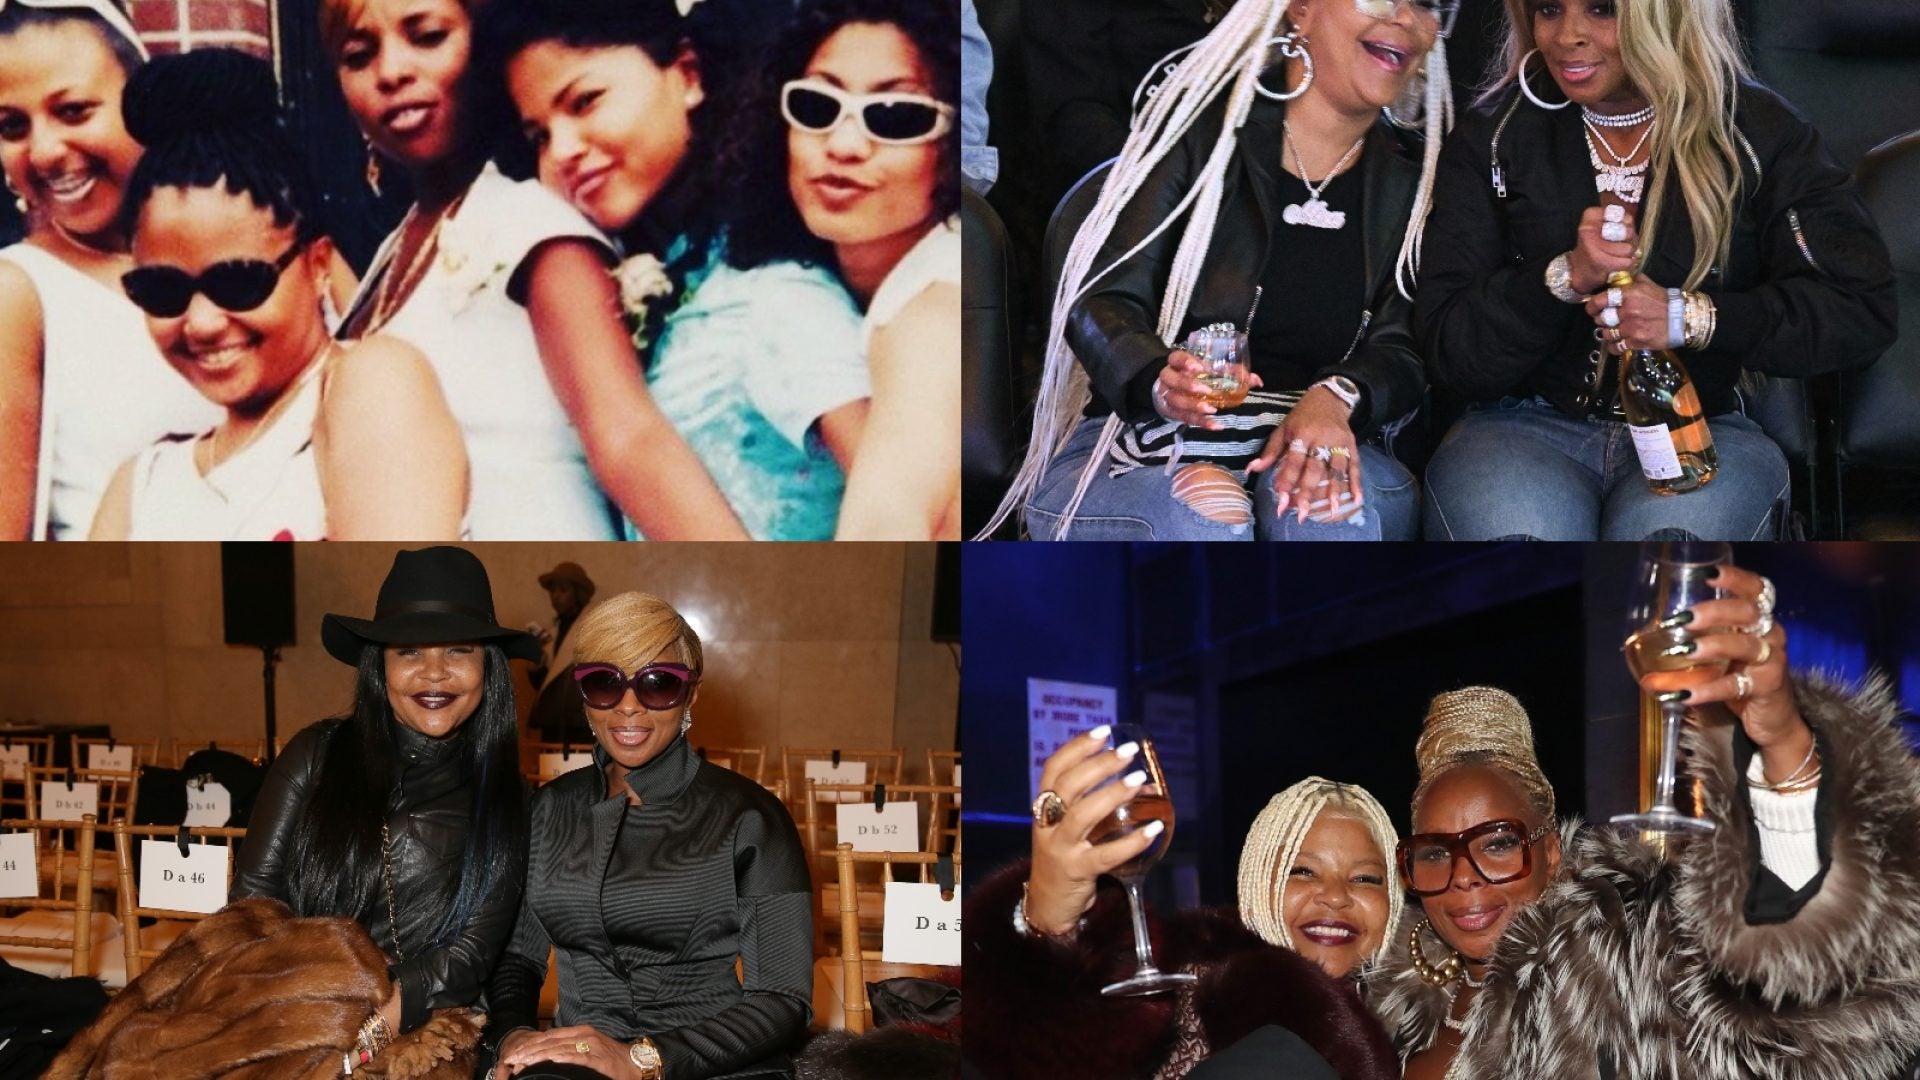 Photos Of Mary J. Blige And Misa Hylton's Friendship From Over The Years